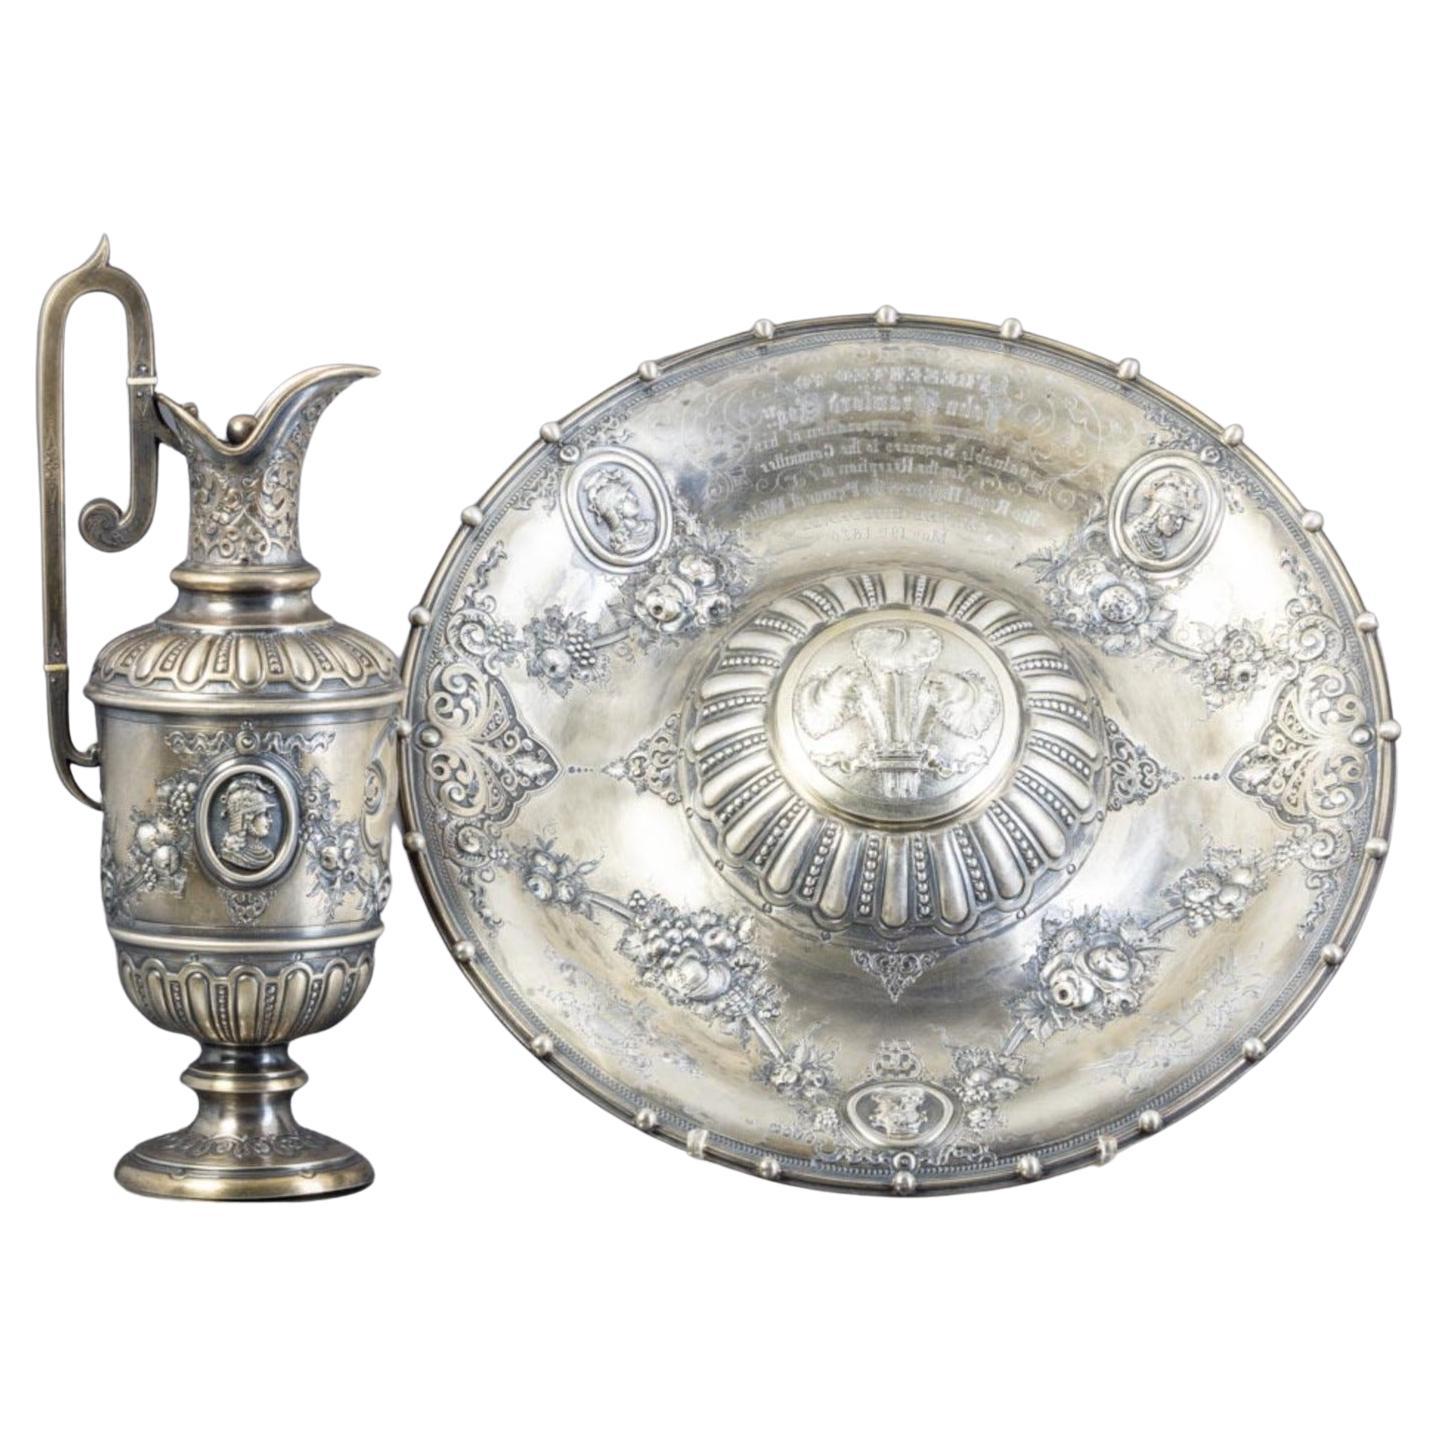 Important and Rare Lavender and Gomil in English Silver 19th Century